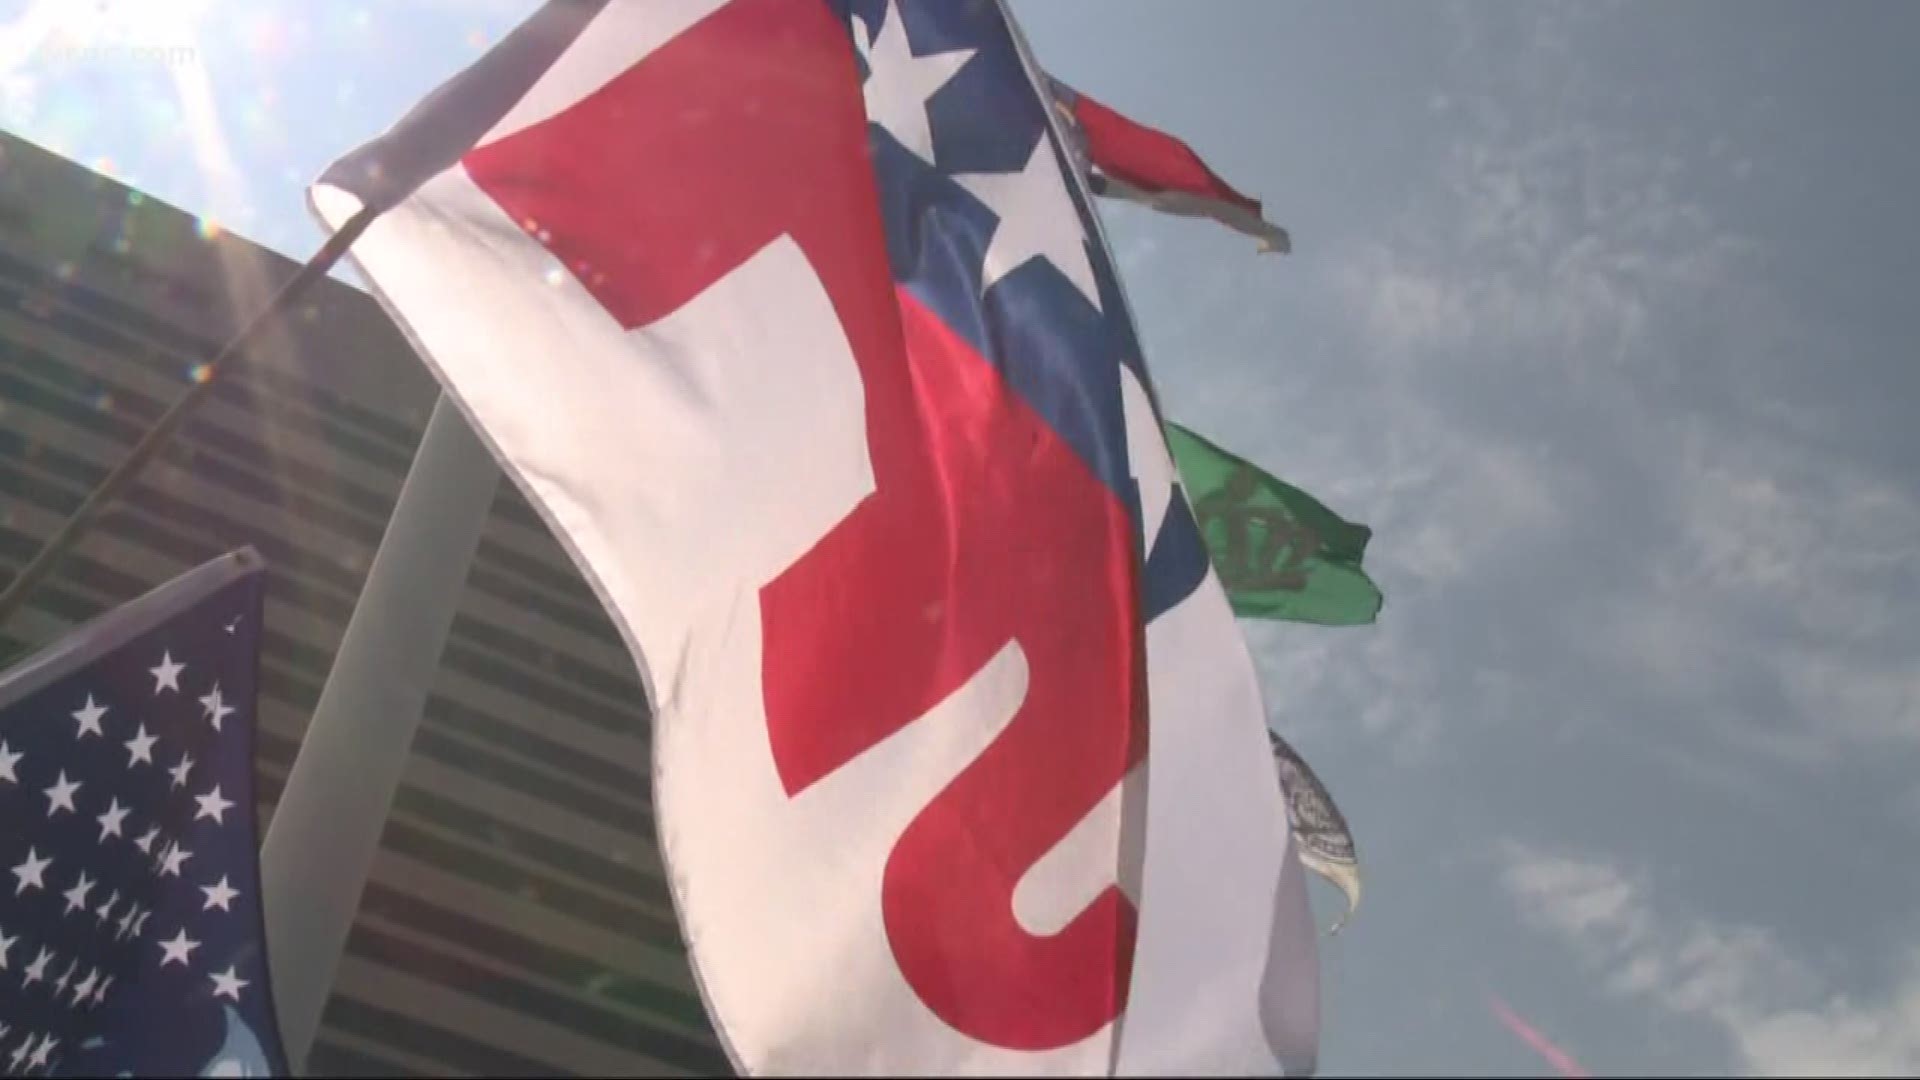 Charlotte city leaders have arrived in Austin ahead of a vote that could give the city the 2020 RNC.